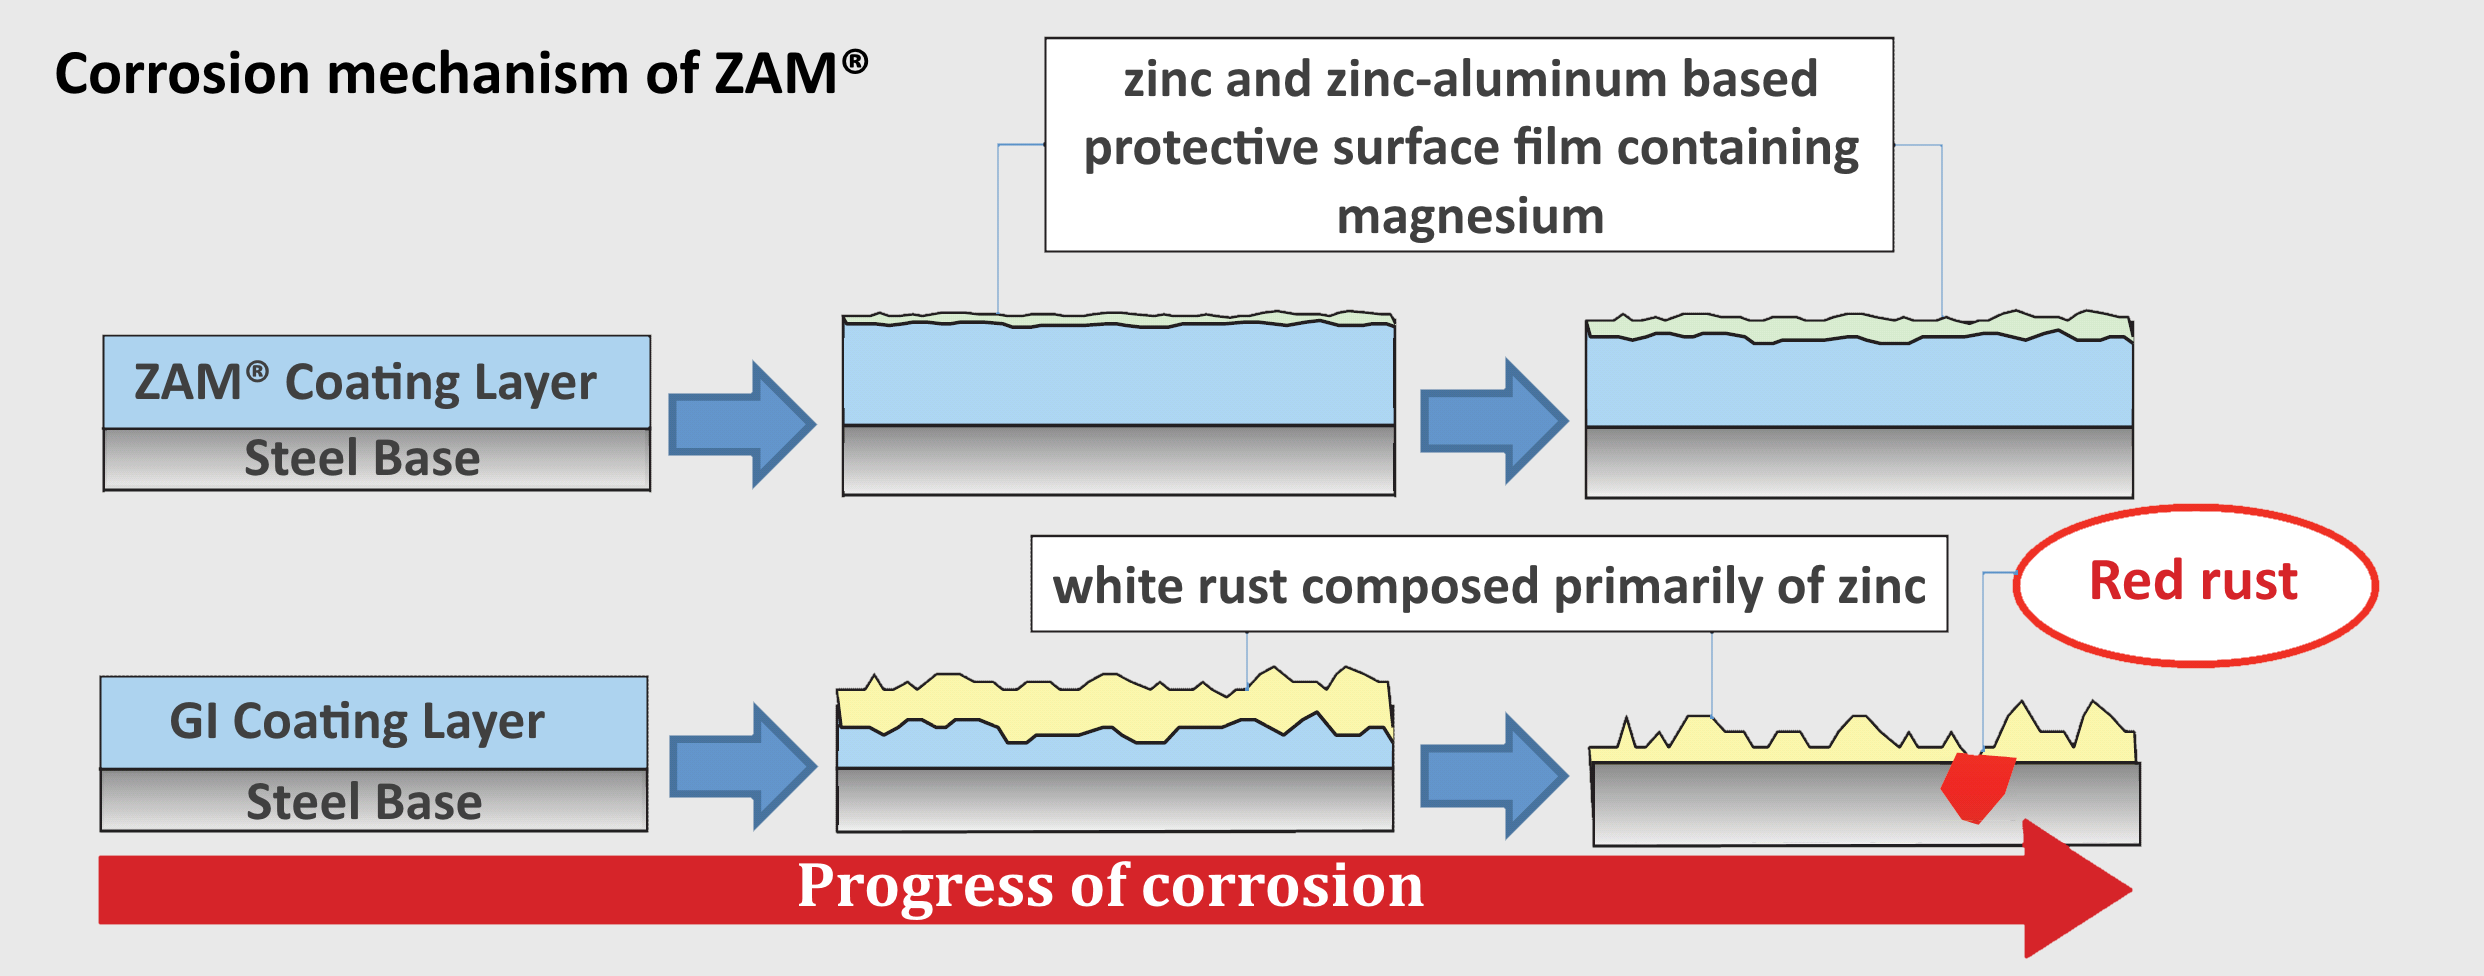 Illustration of the slower progress of corrosion of ZAM as compared to Galvanized